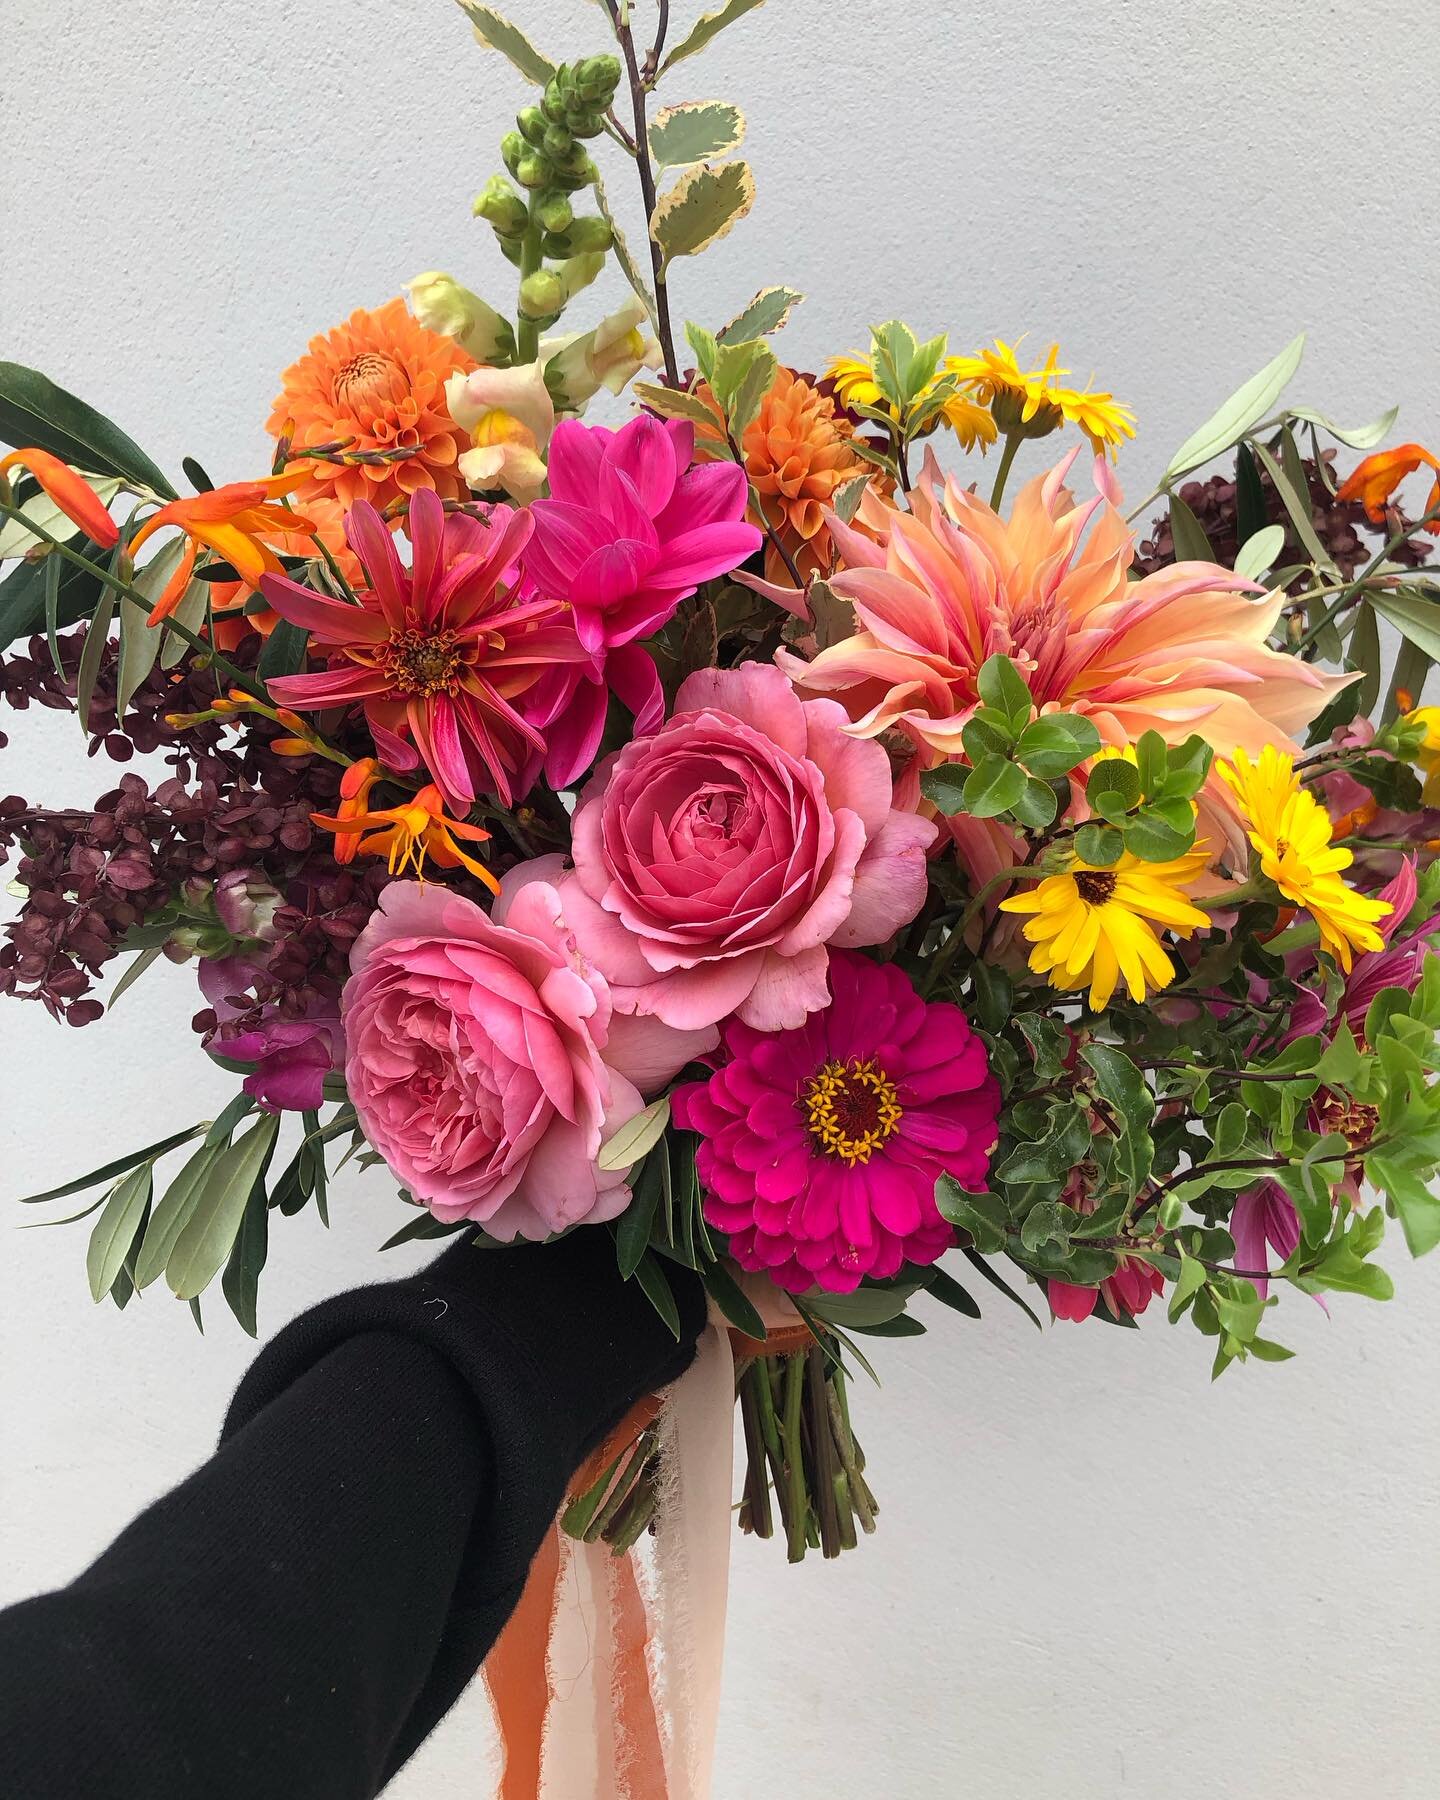 I&rsquo;ve got out of the habit of posting again but not overthinking it this morning and starting back with one of my favourite kinds of bouquets, bright colour, texture and Sussex summer flowers. 

It&rsquo;s not long to go now until my wedding sea